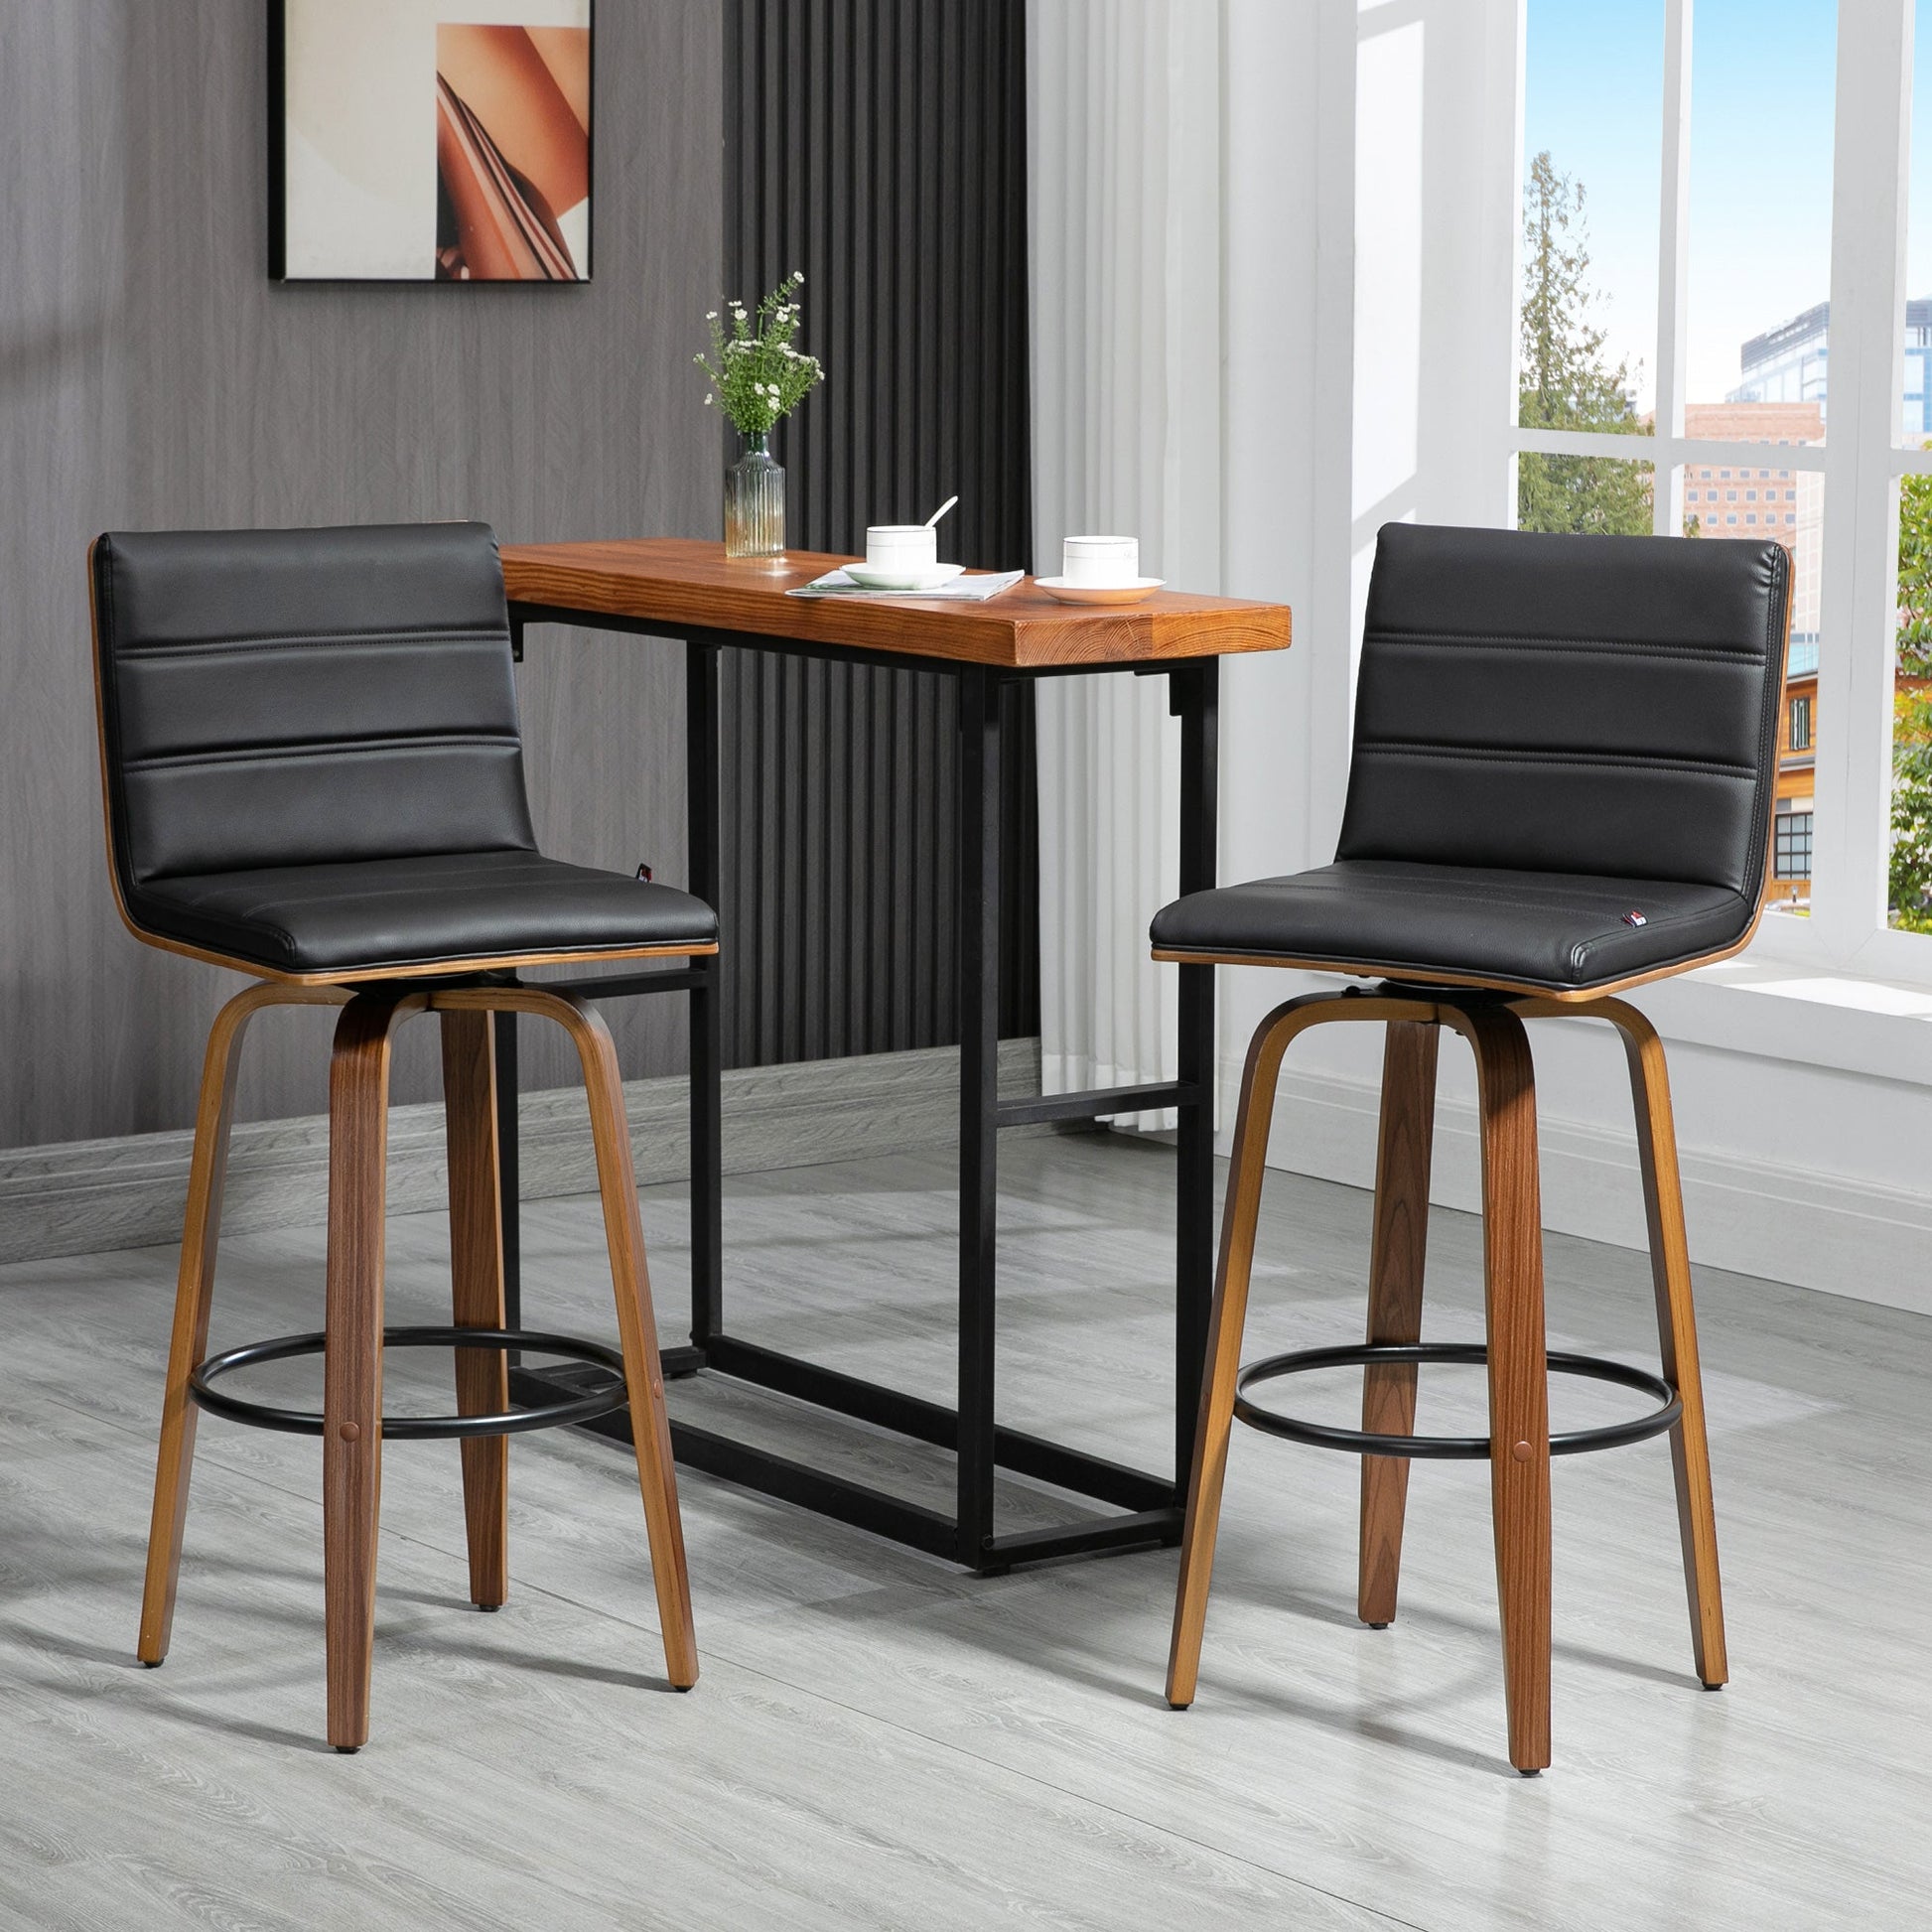 Swivel Bar Stools Set of 2, Upholstered Bar Height Stools, Bar Chairs with Soft Padding Seat and Wood Legs, Black at Gallery Canada